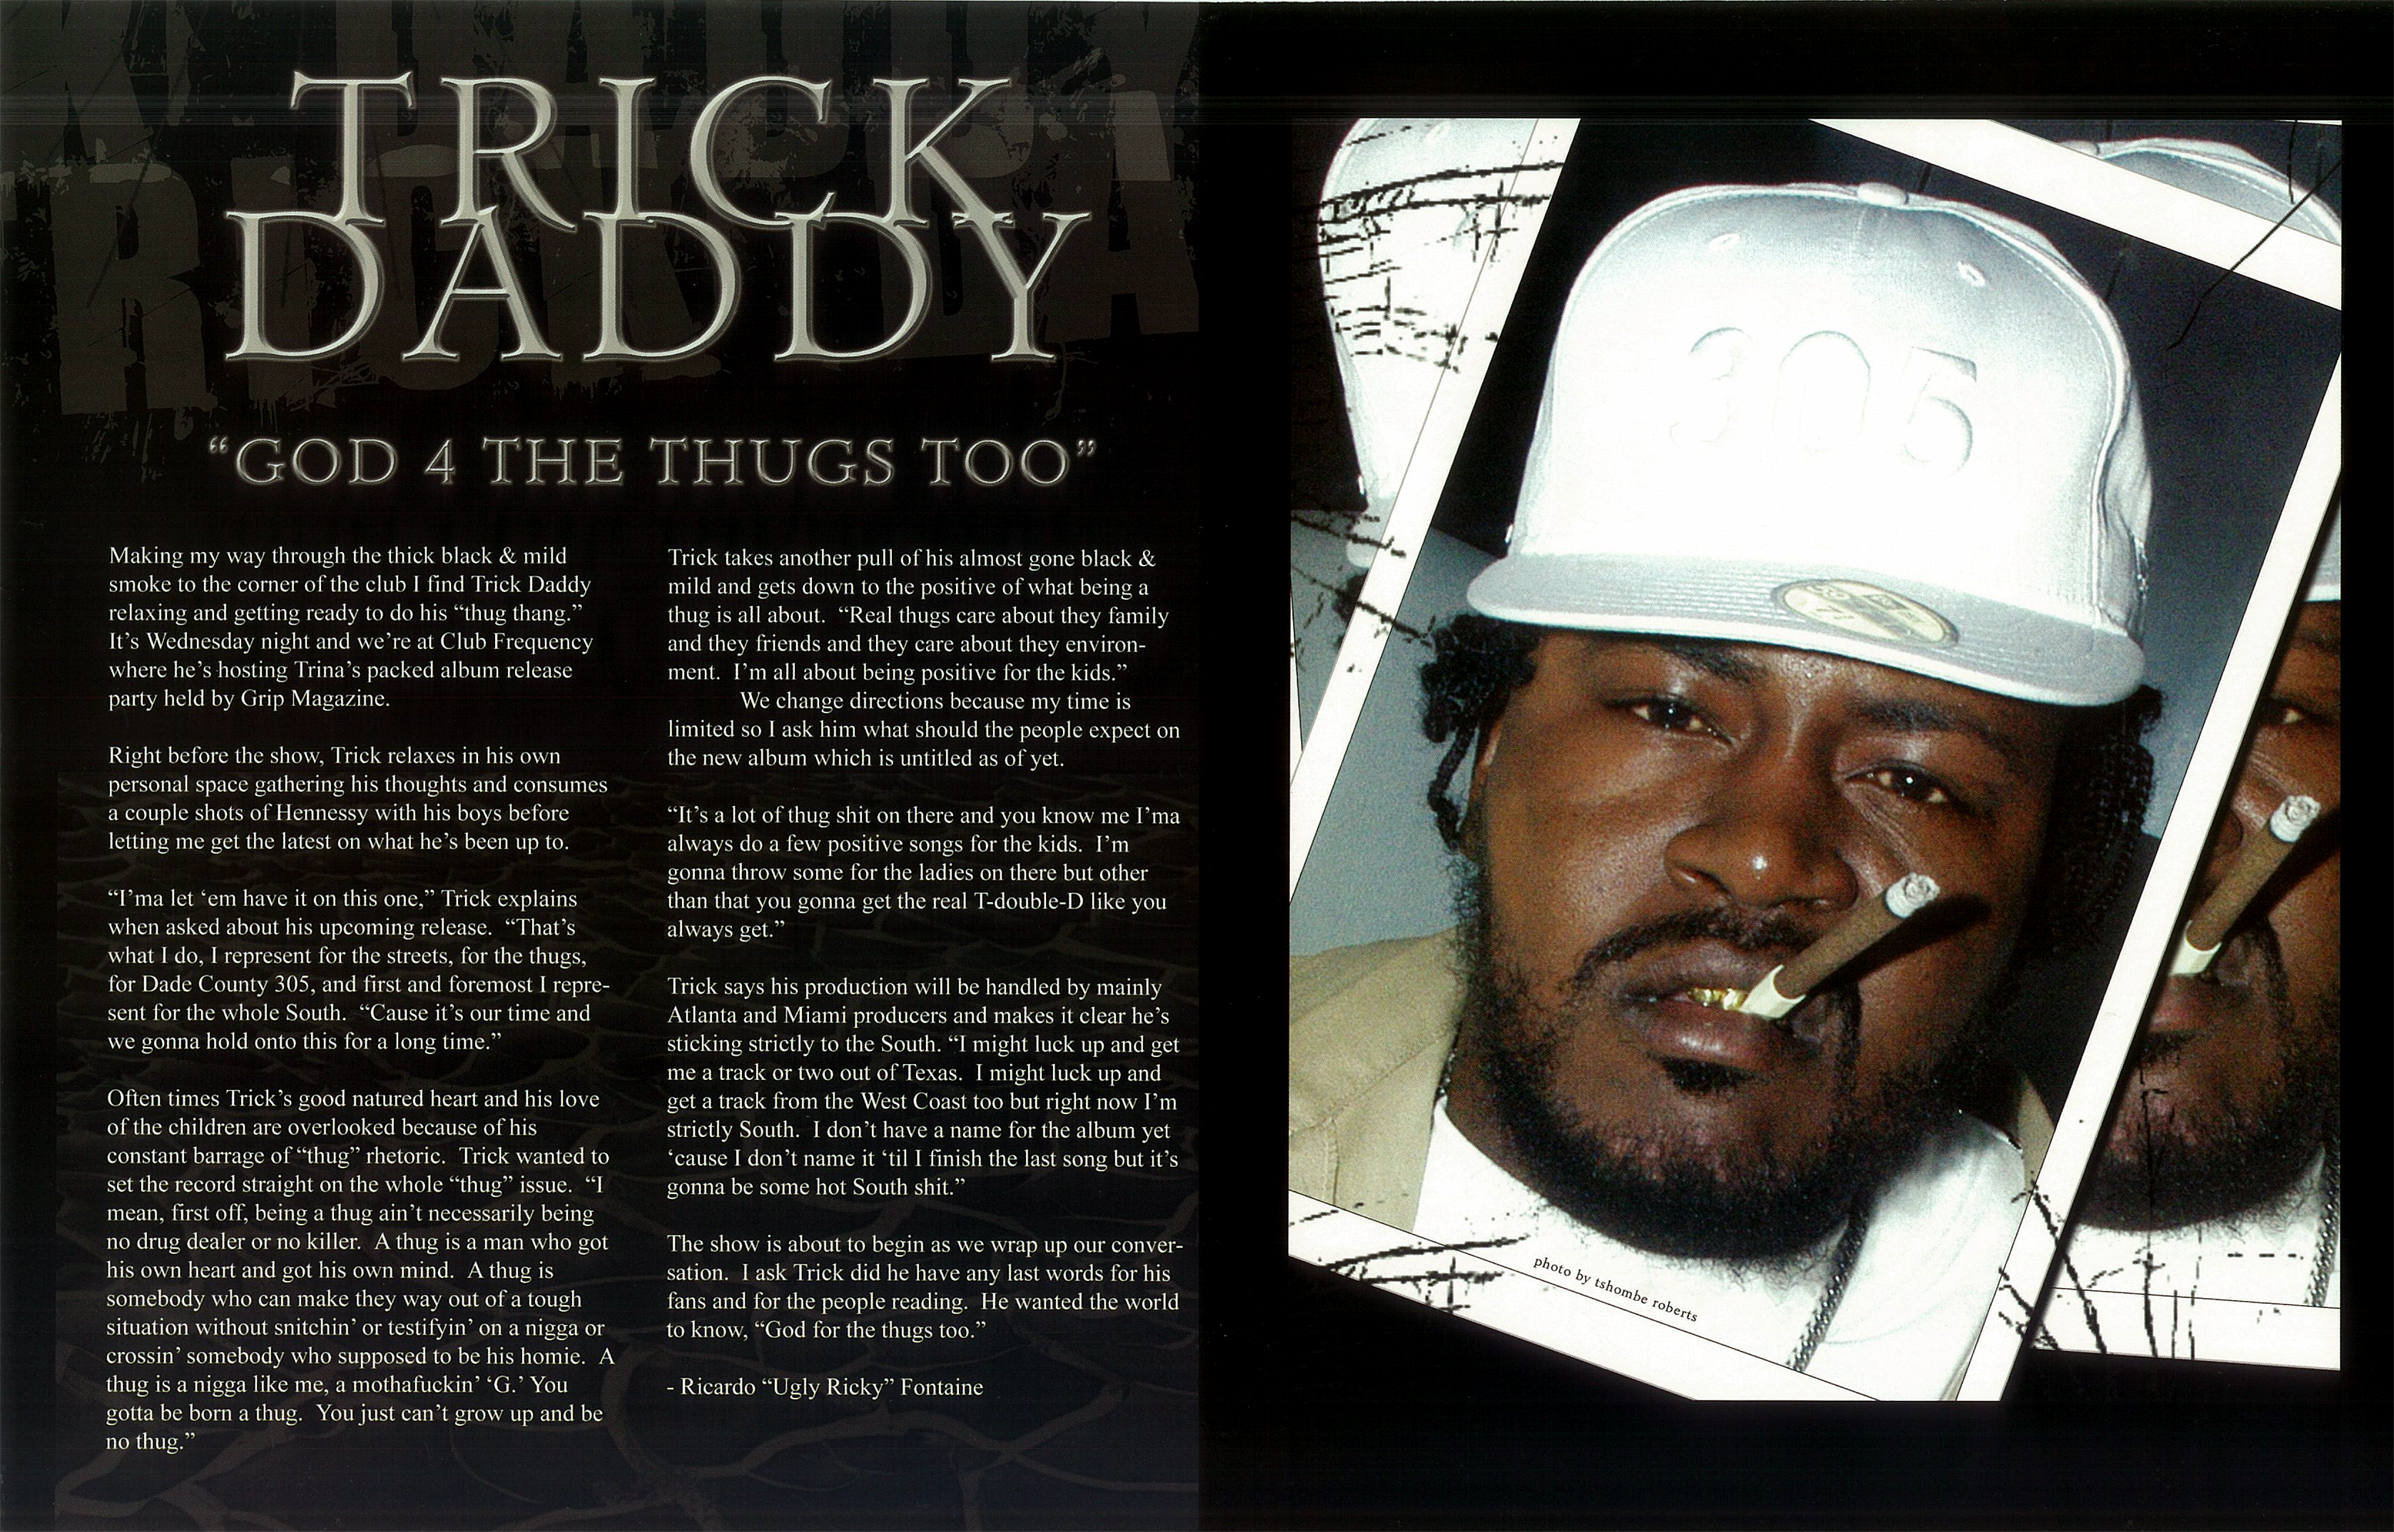 More Pictures Of Trick Daddy. trick daddy tattoos. 